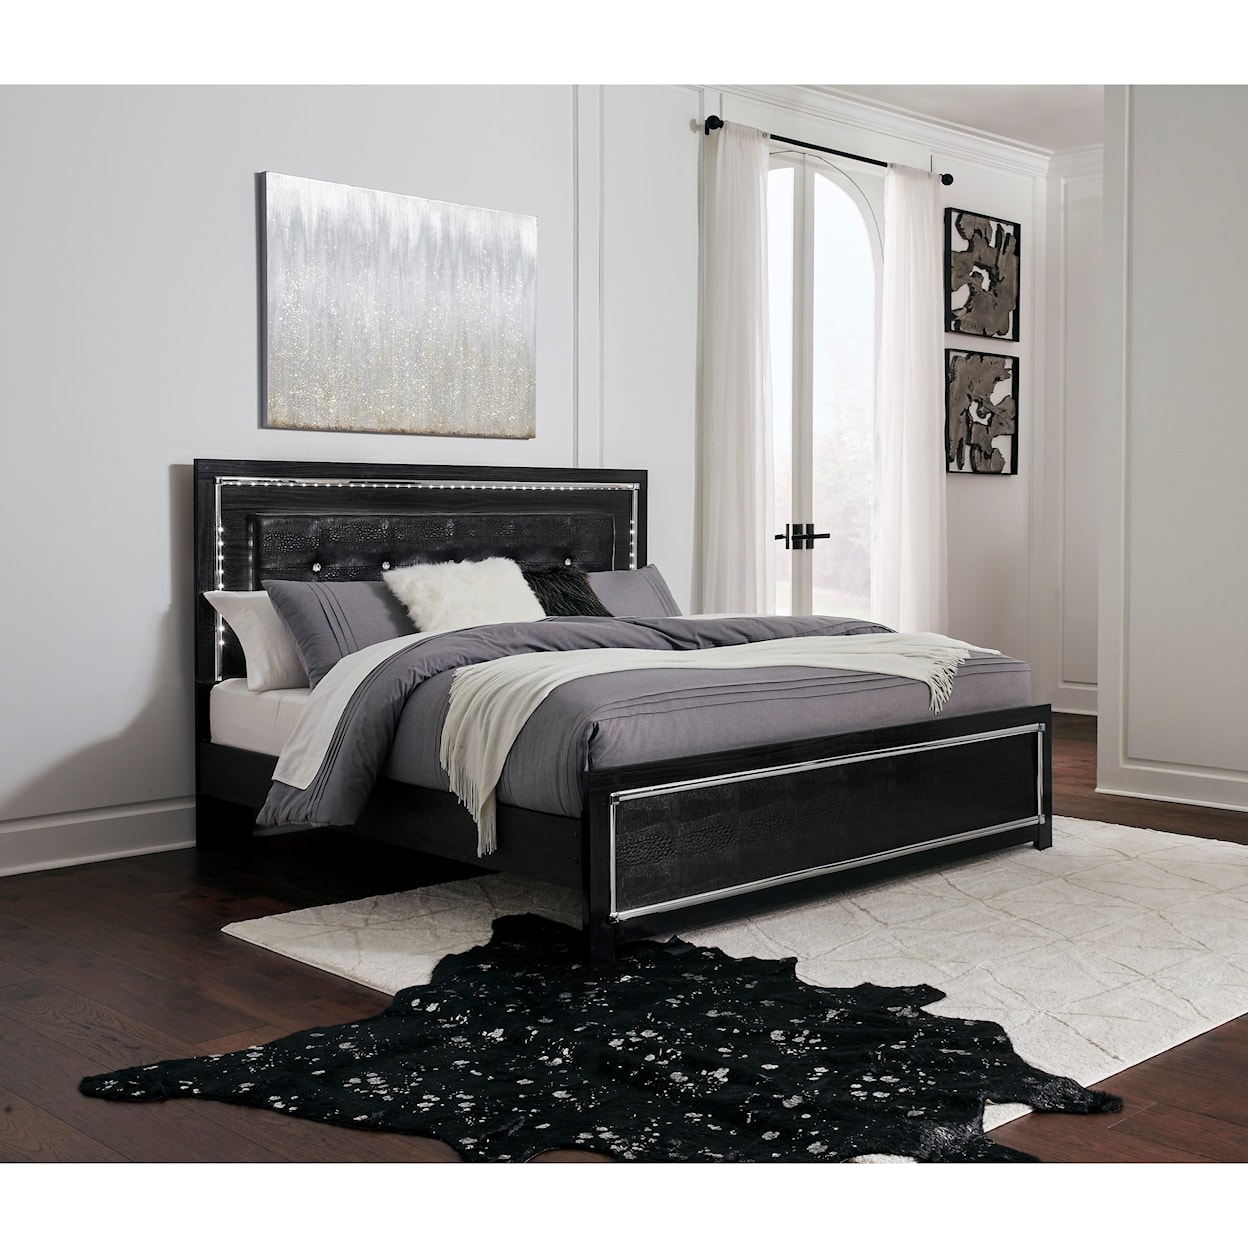 Signature Design by Ashley Furniture Kaydell King Upholstered Bed with LED Lighting